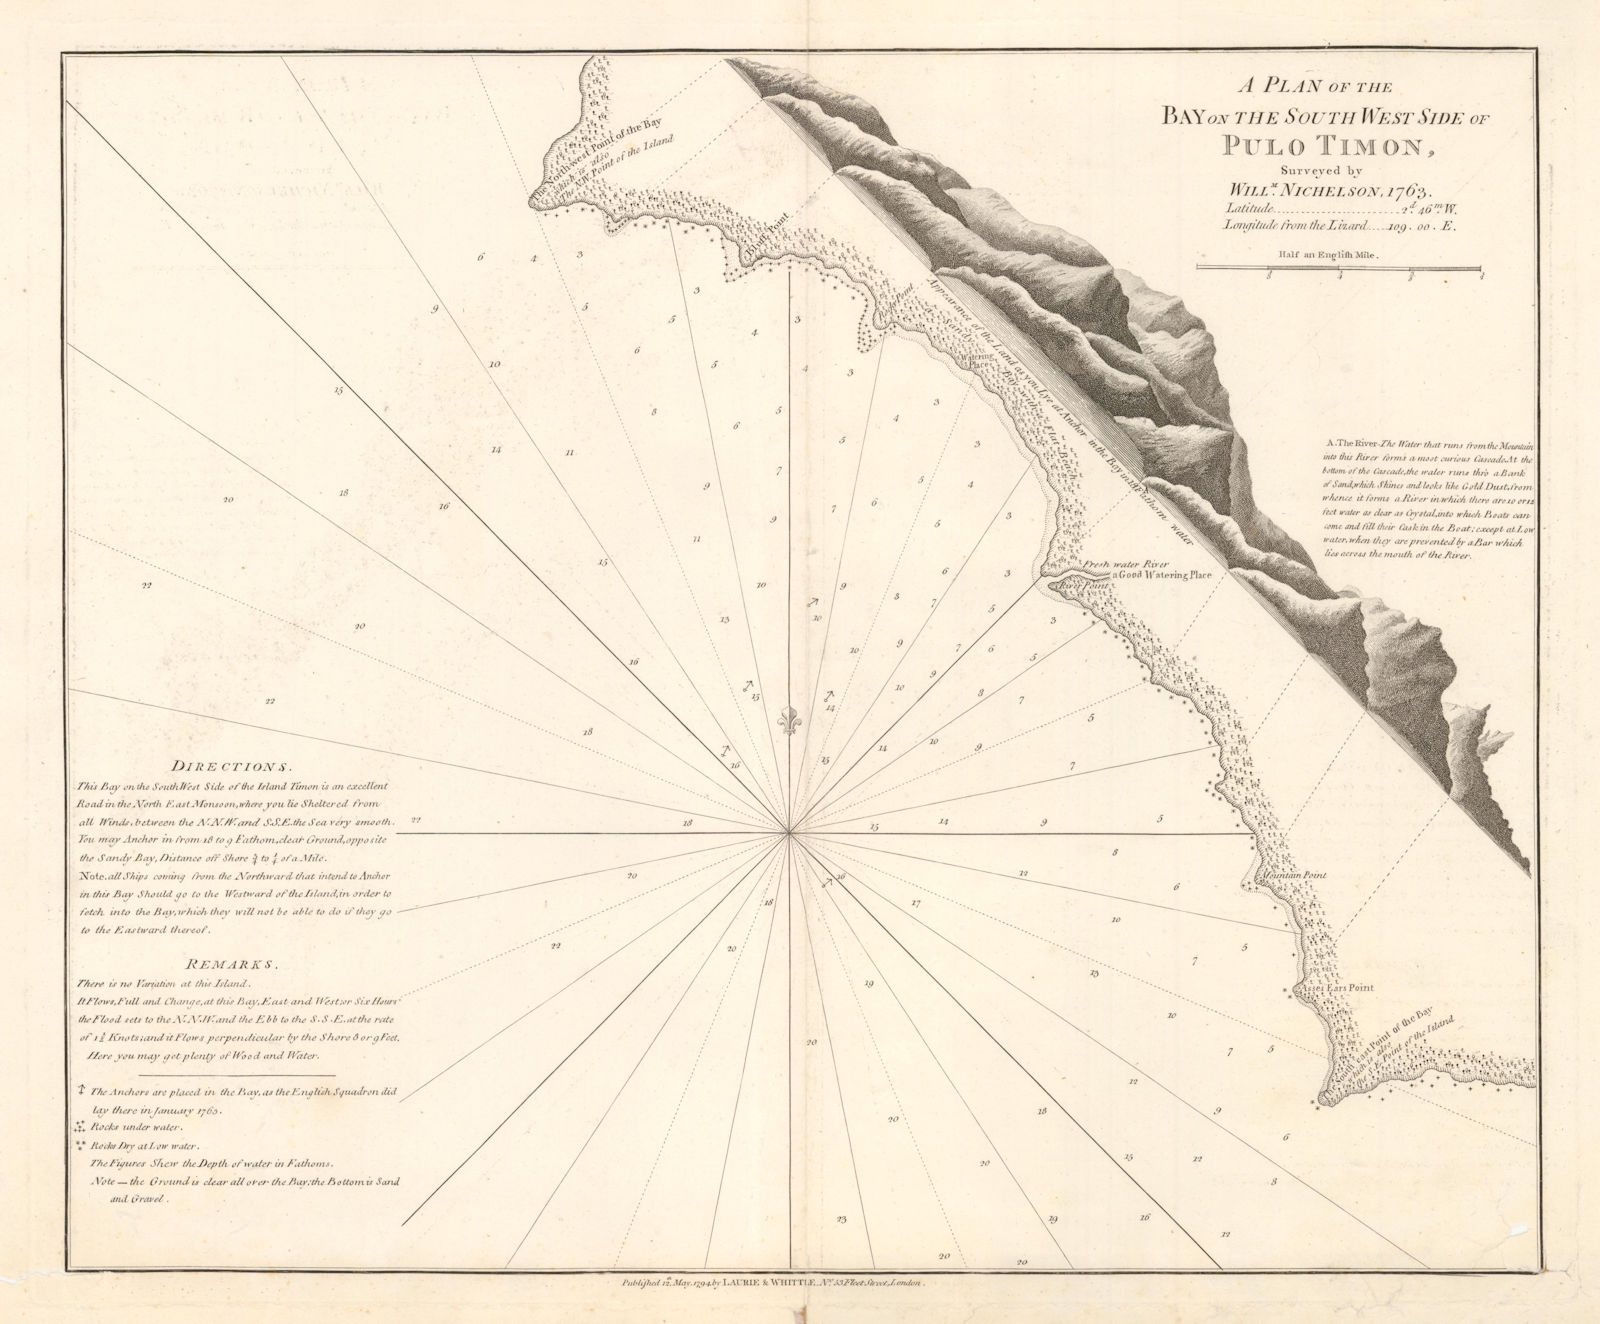 'South West Side of Pulo Timon'. Pulau Tioman Malaysia LAURIE & WHITTLE 1794 map